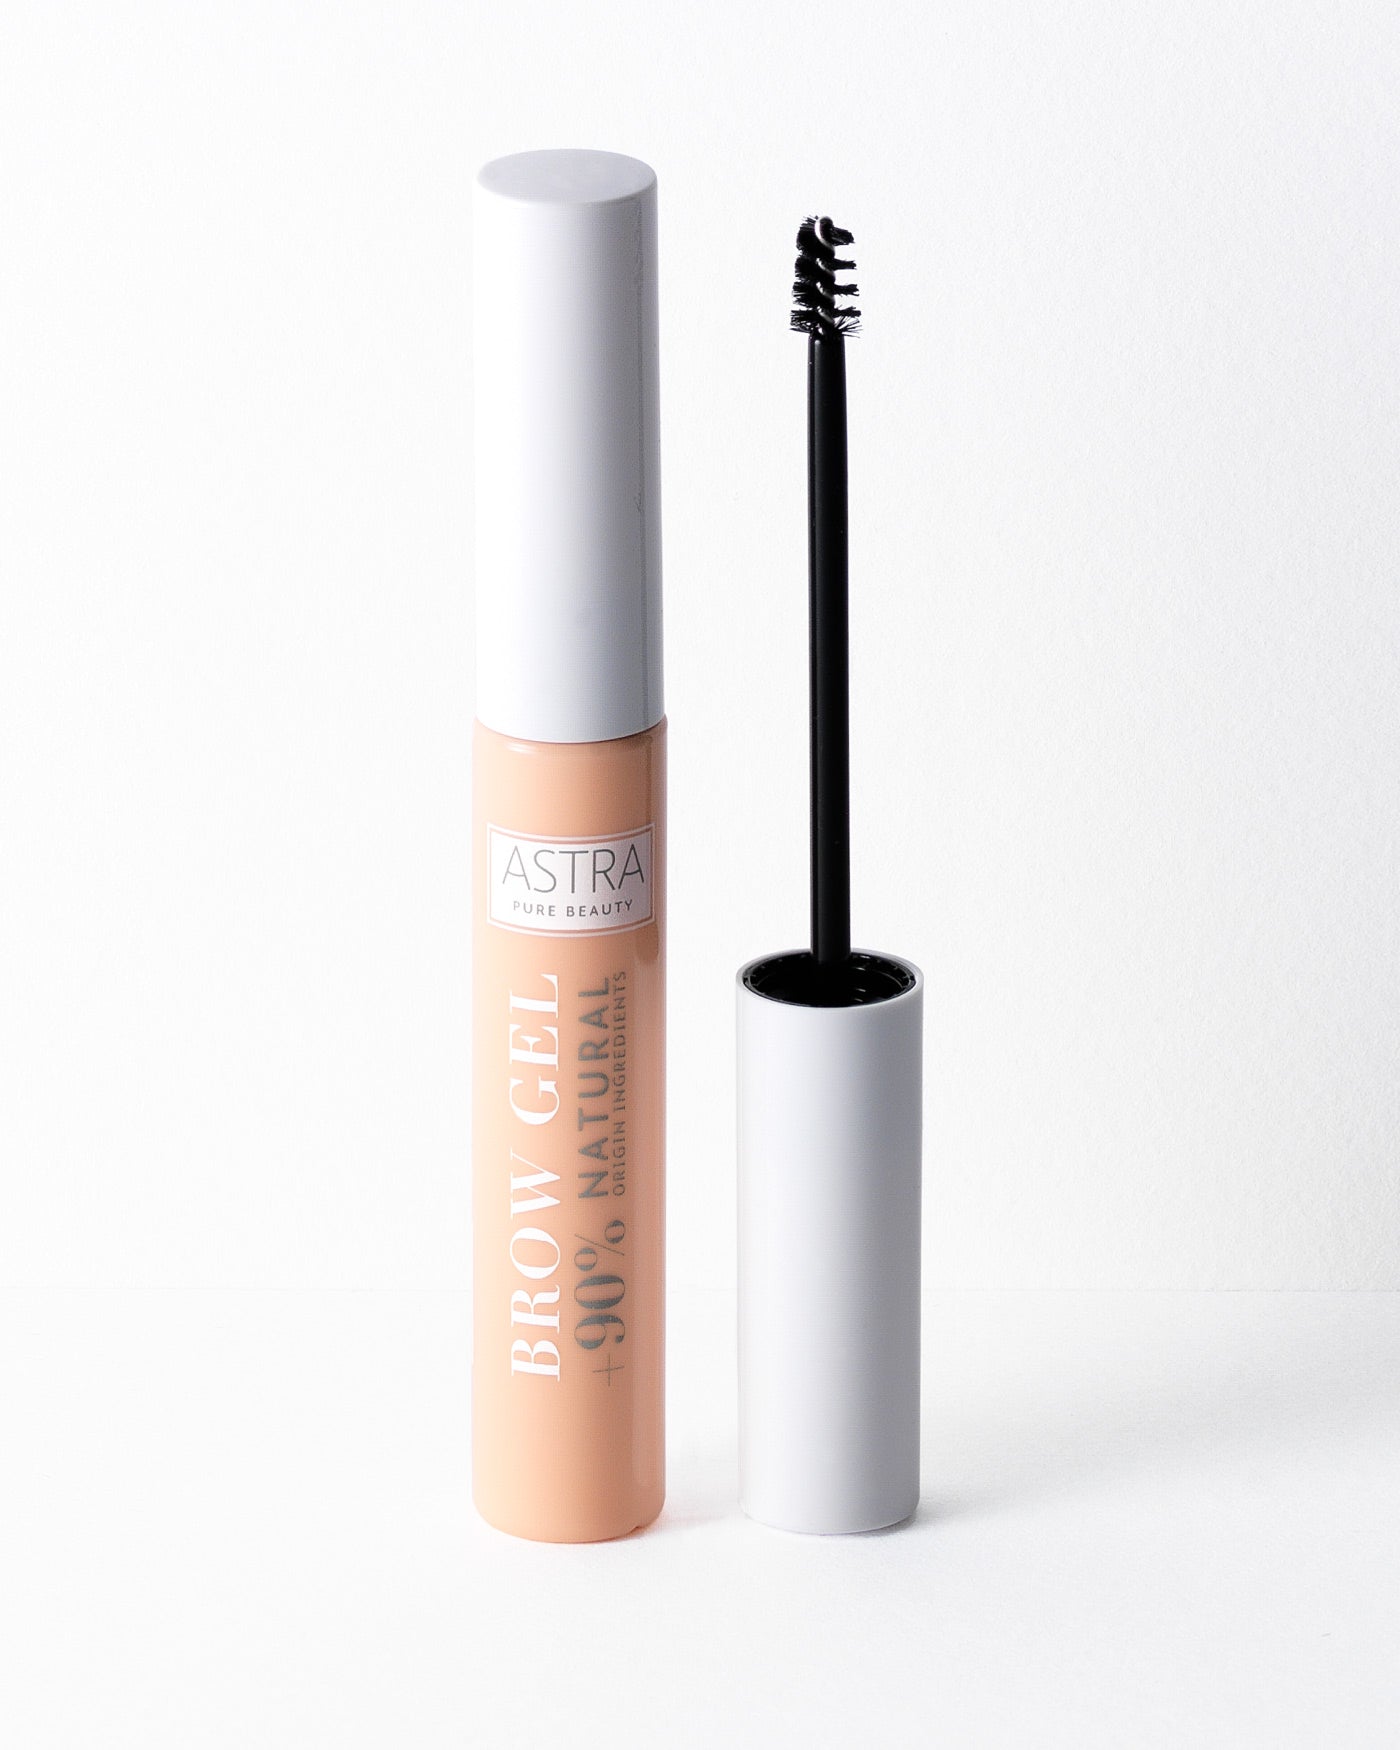 PURE BEAUTY BROW GEL - All Products - Astra Make-Up